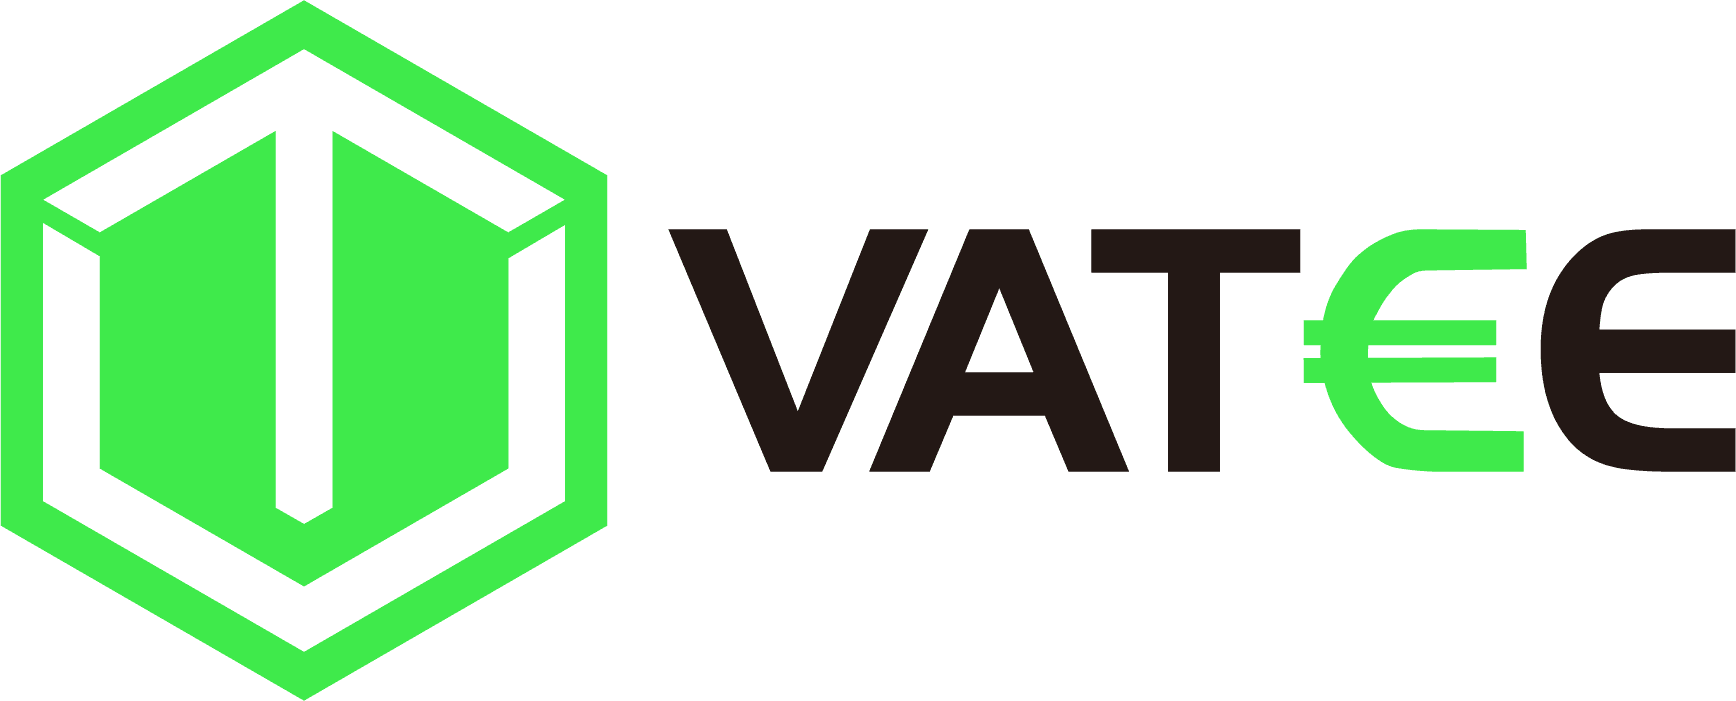 Vatee Pty Limited